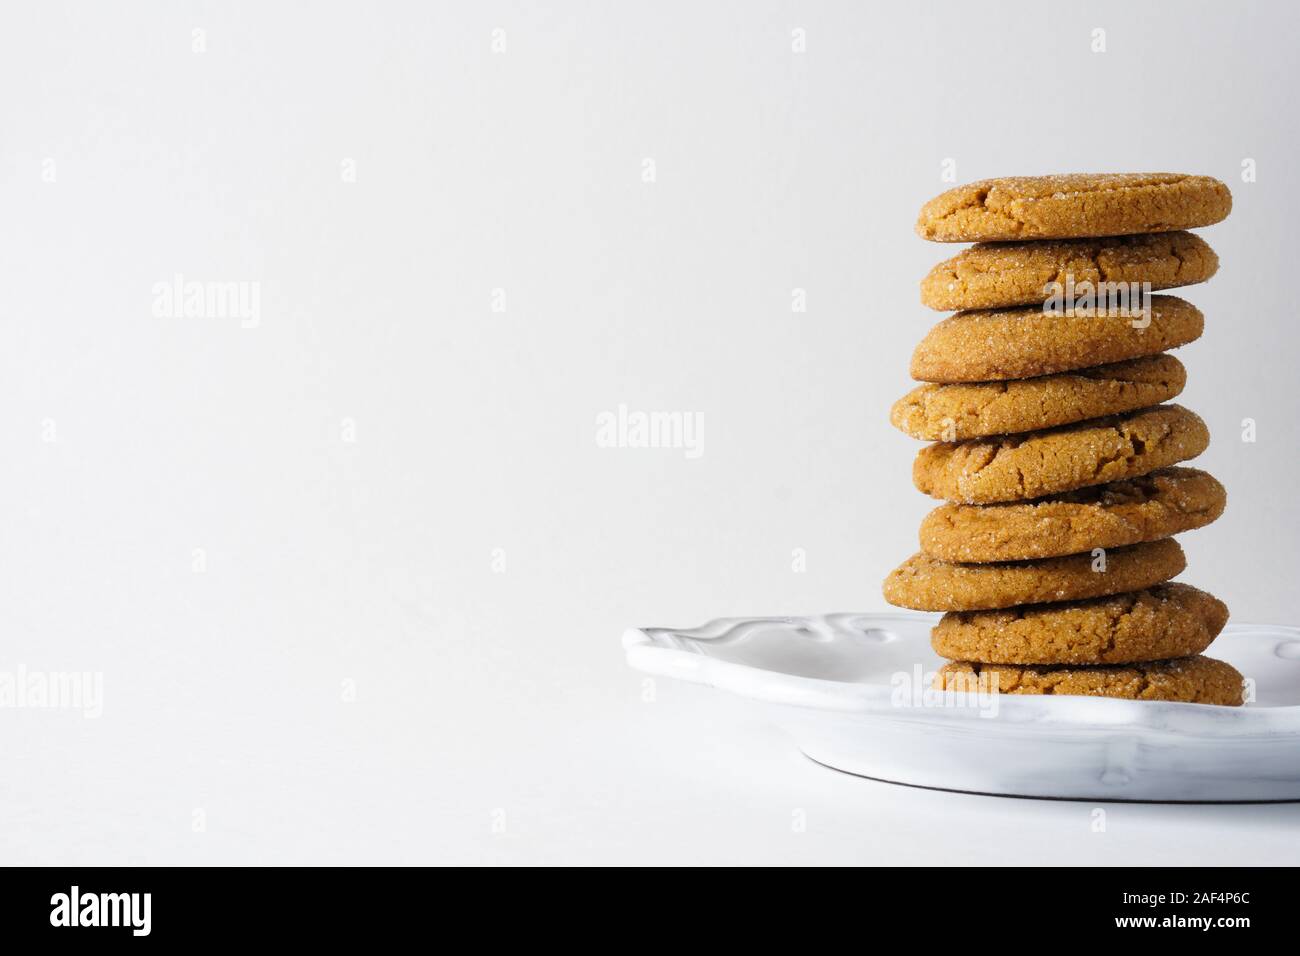 A pile of gingerbread cookies on a white plate and white background with copy space to the left Stock Photo